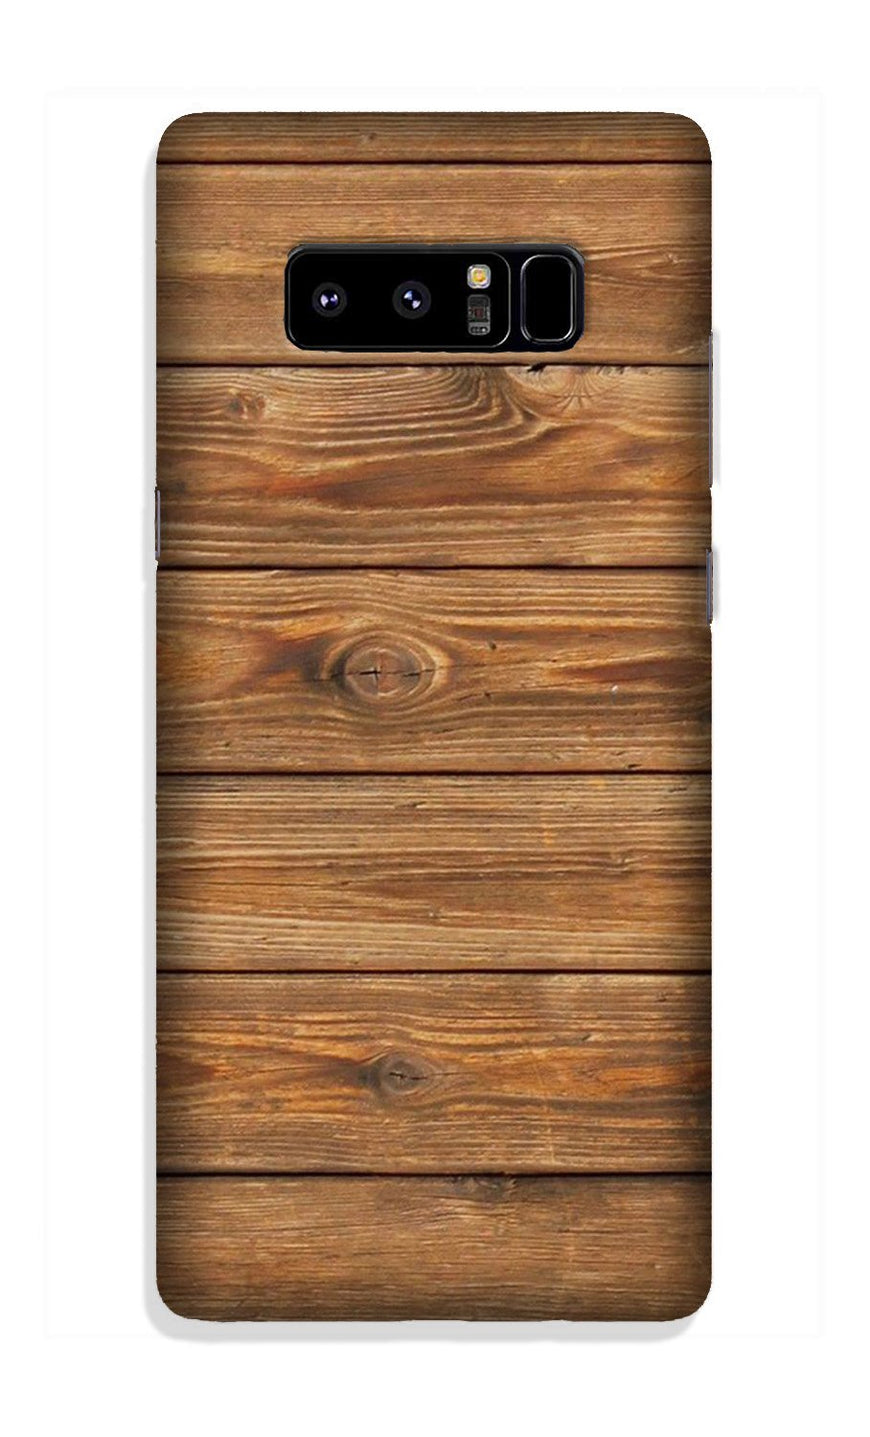 Wooden Look Case for Galaxy Note 8  (Design - 113)